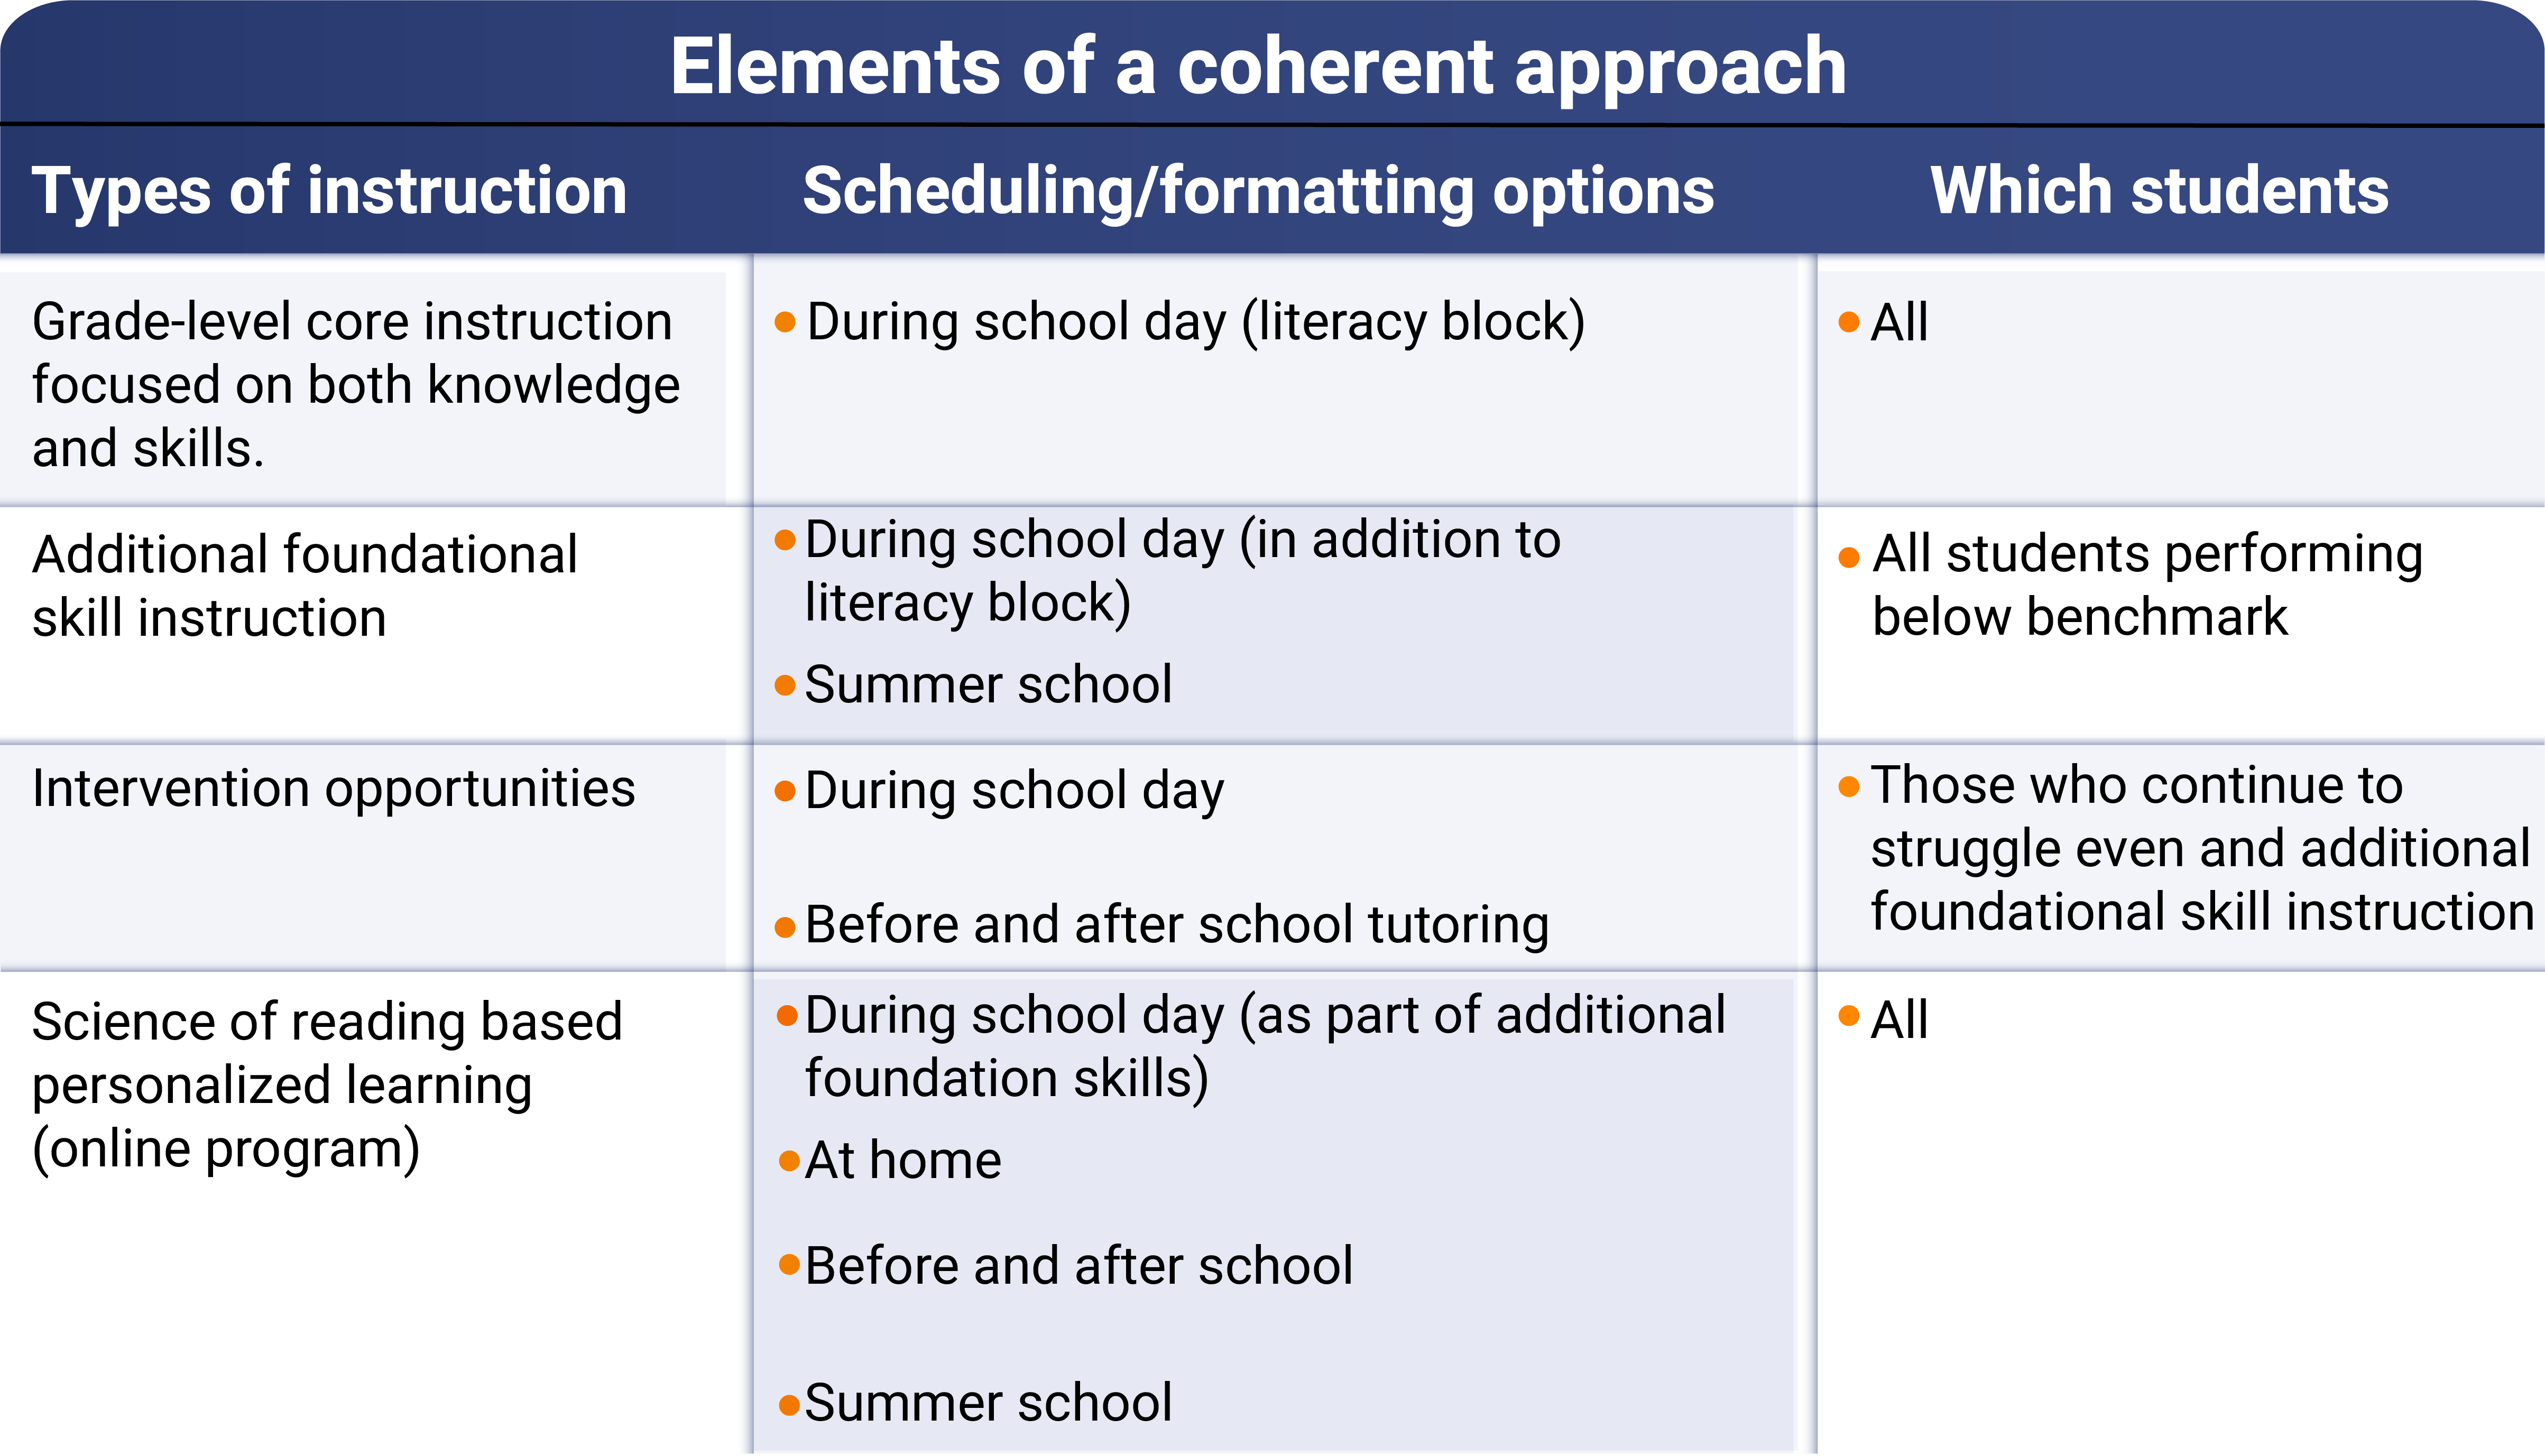 Elements of Coherent Approach in education